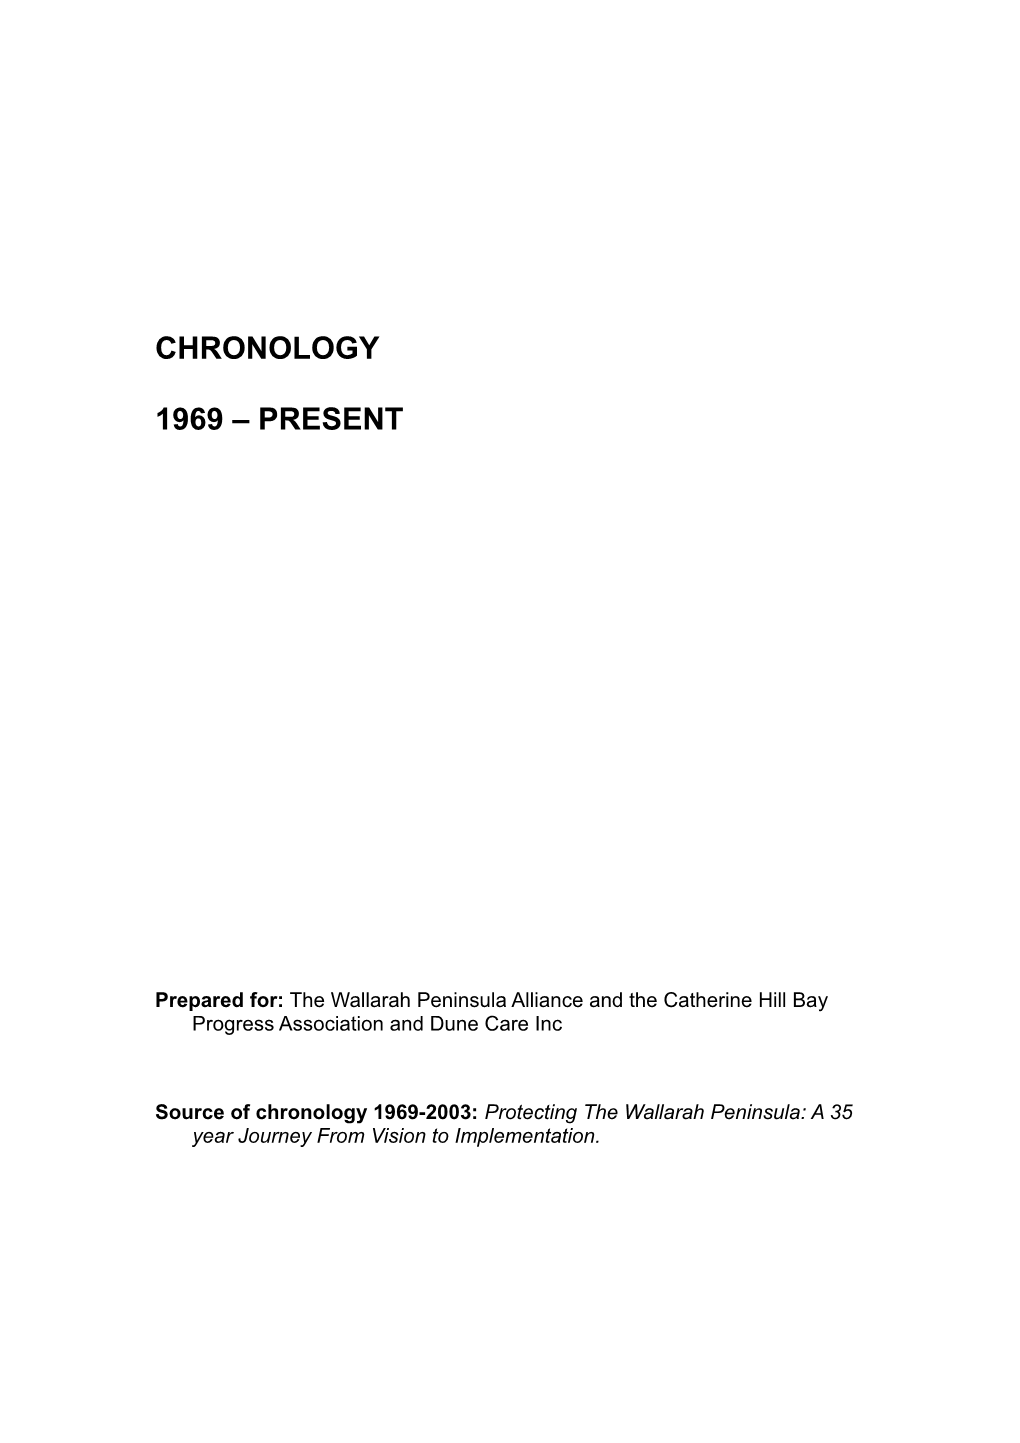 Source of Chronology 1969-2003: Protecting the Wallarahpeninsula: a 35 Year Journey From